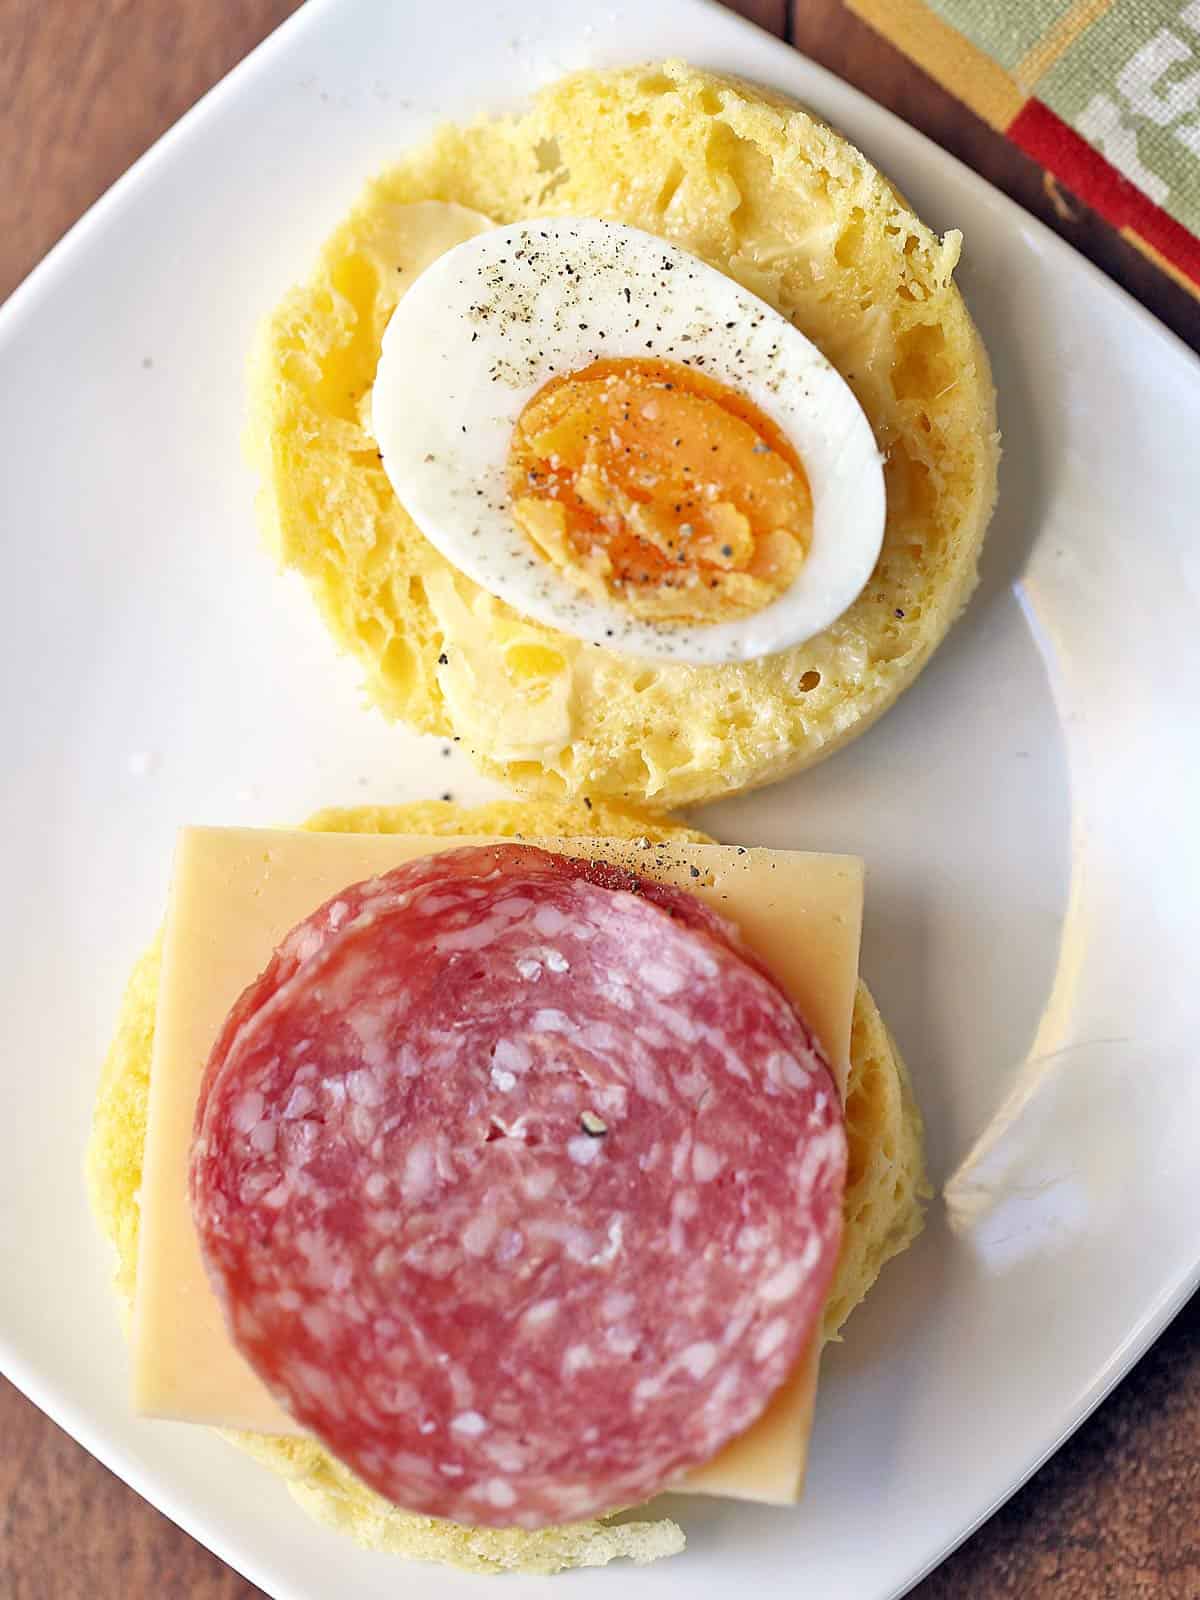 90-second bread topped with eggs, salami, and cheese. 